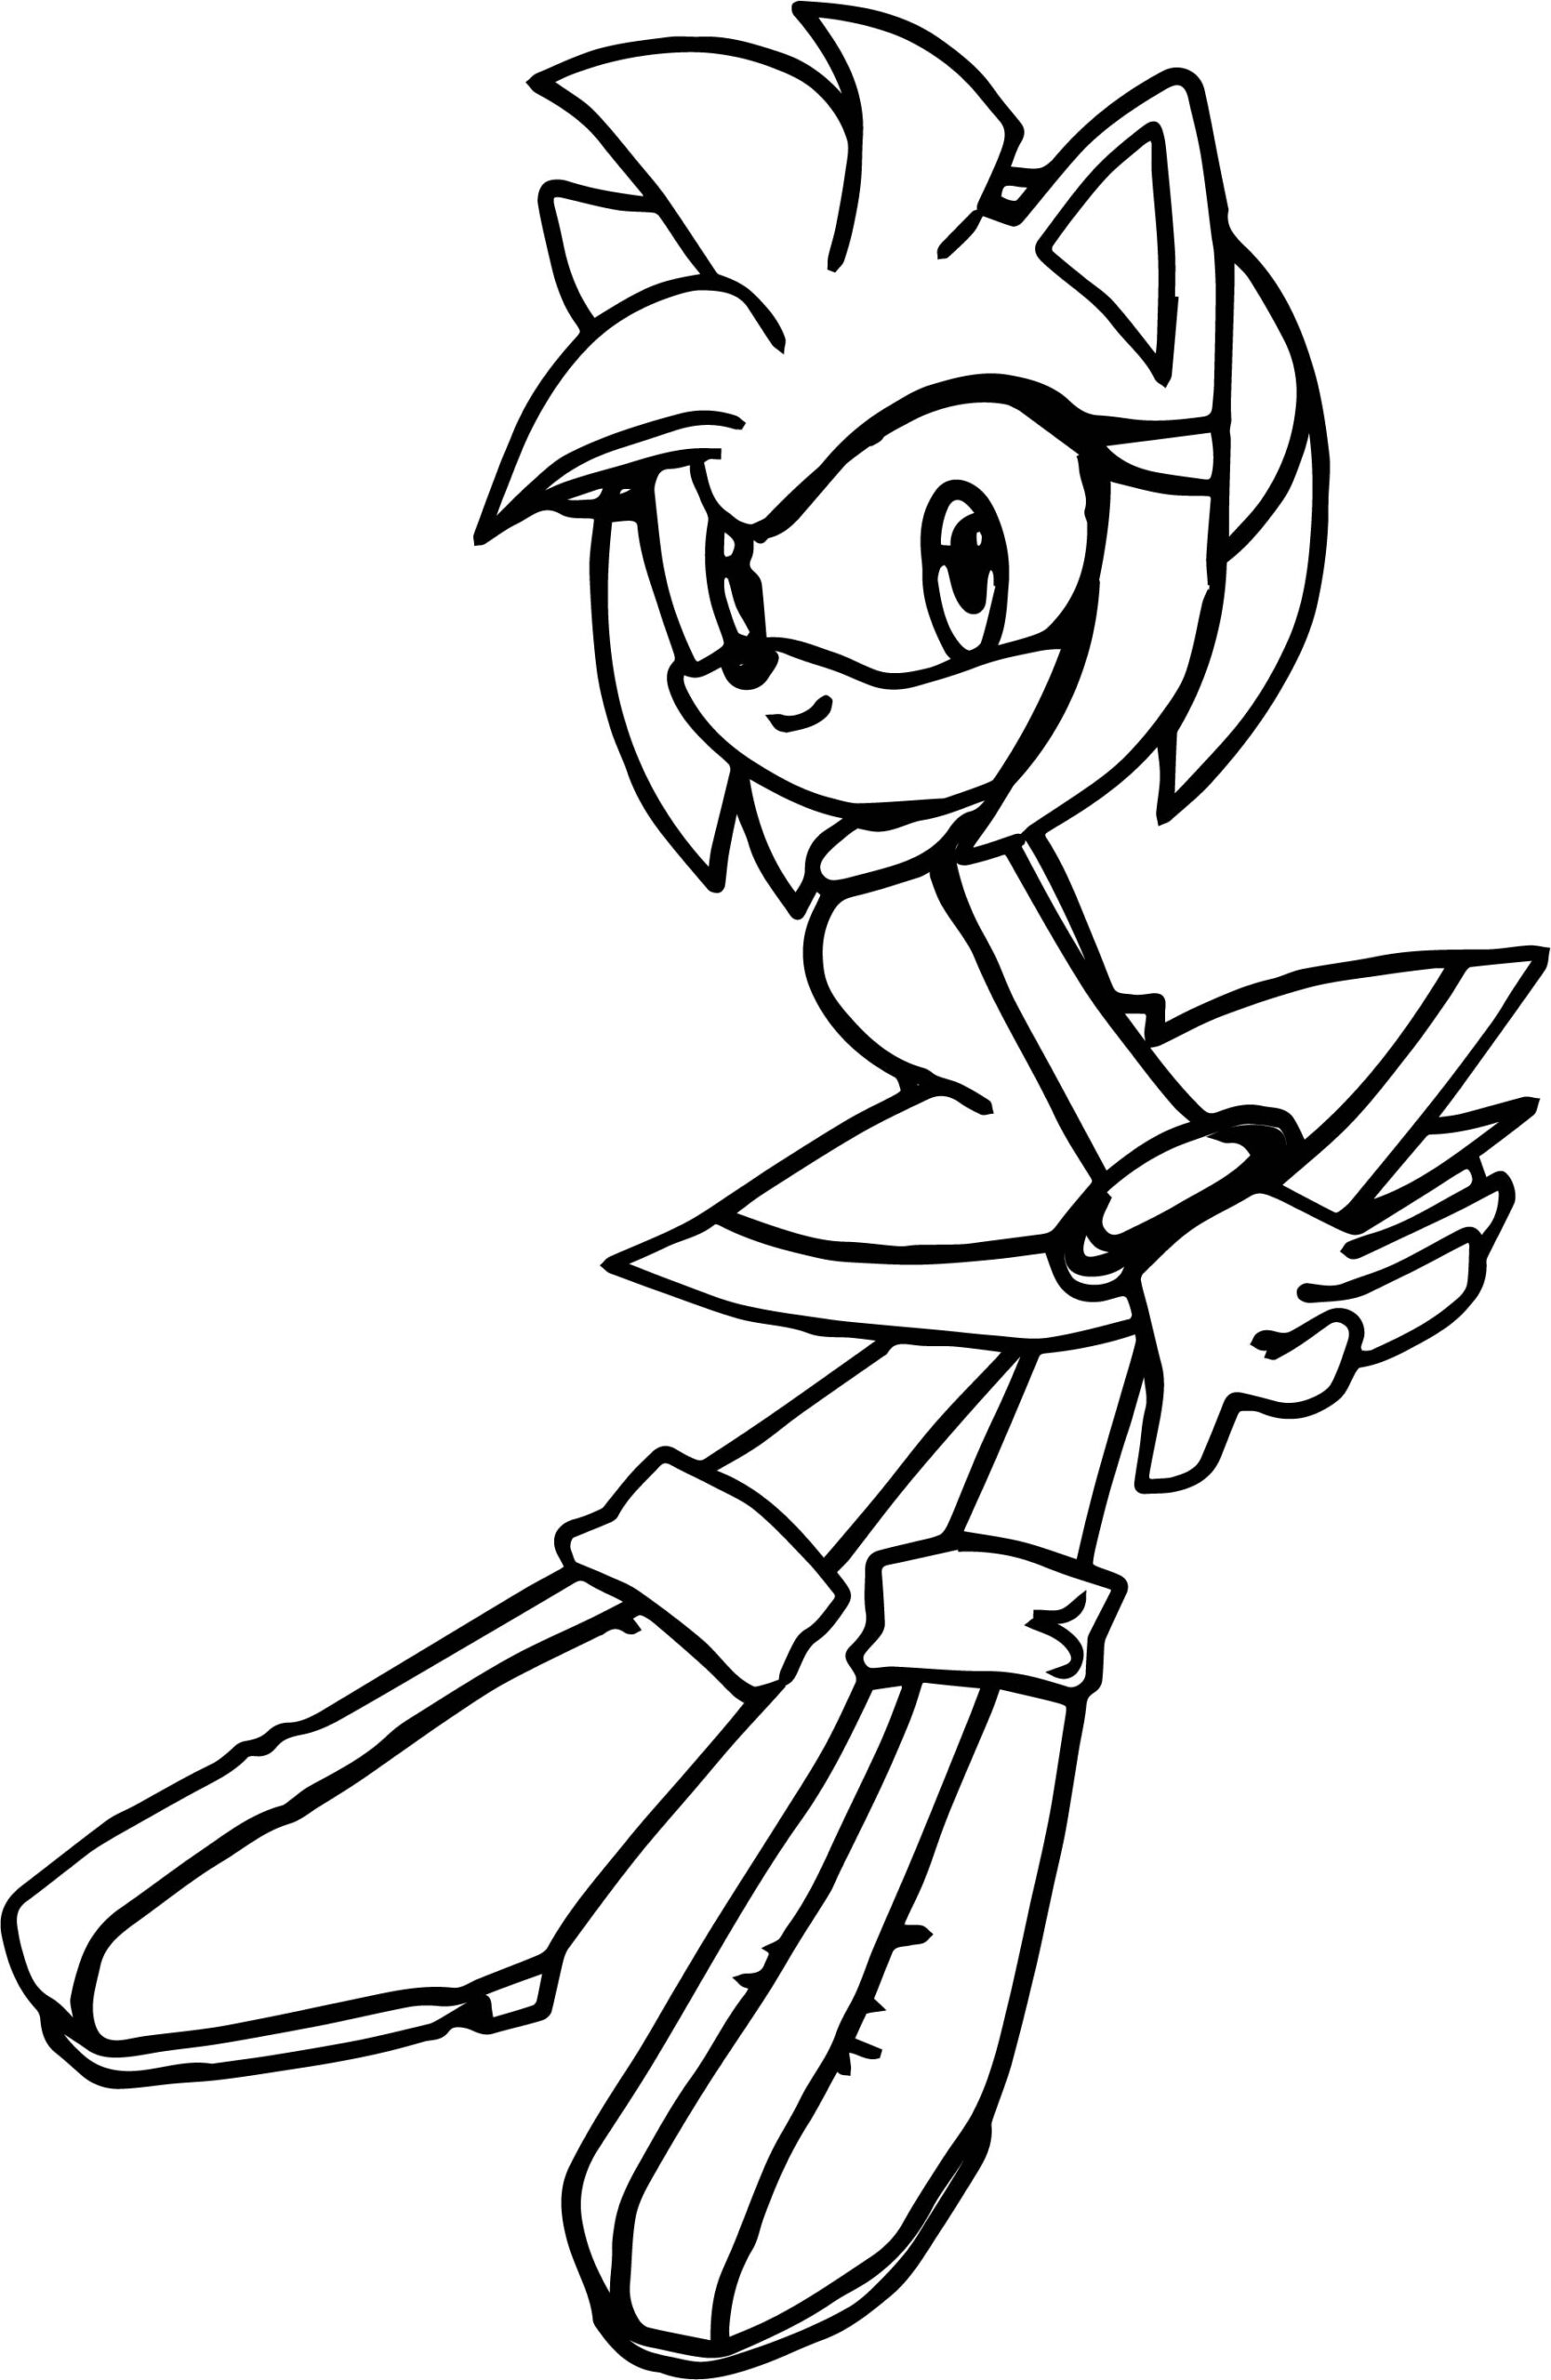 Amy Rose Waiting Coloring Page | Wecoloringpage serapportantà Coloriage Amy Rose